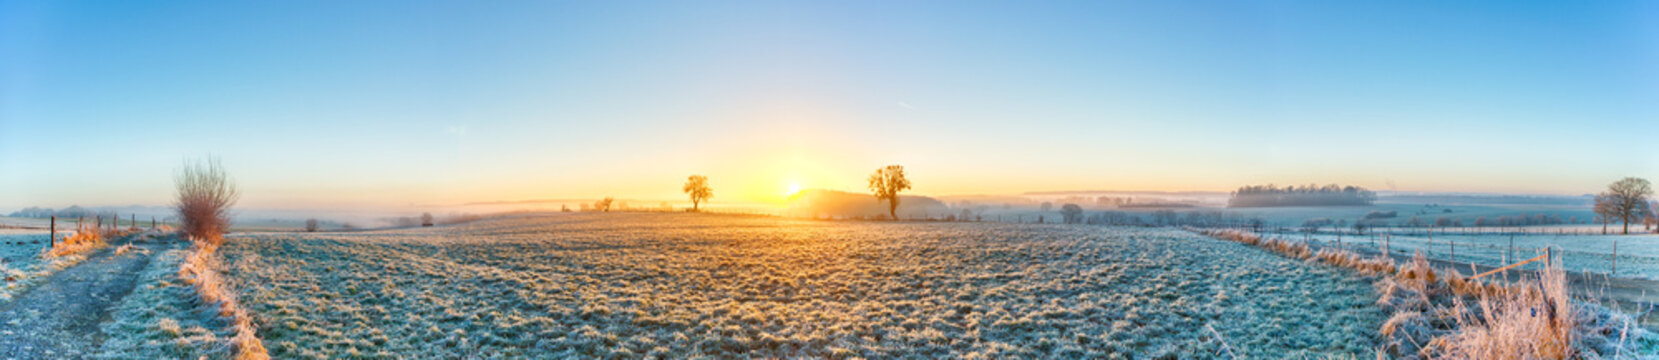 Sunrise on a cold winter day - panoramic view